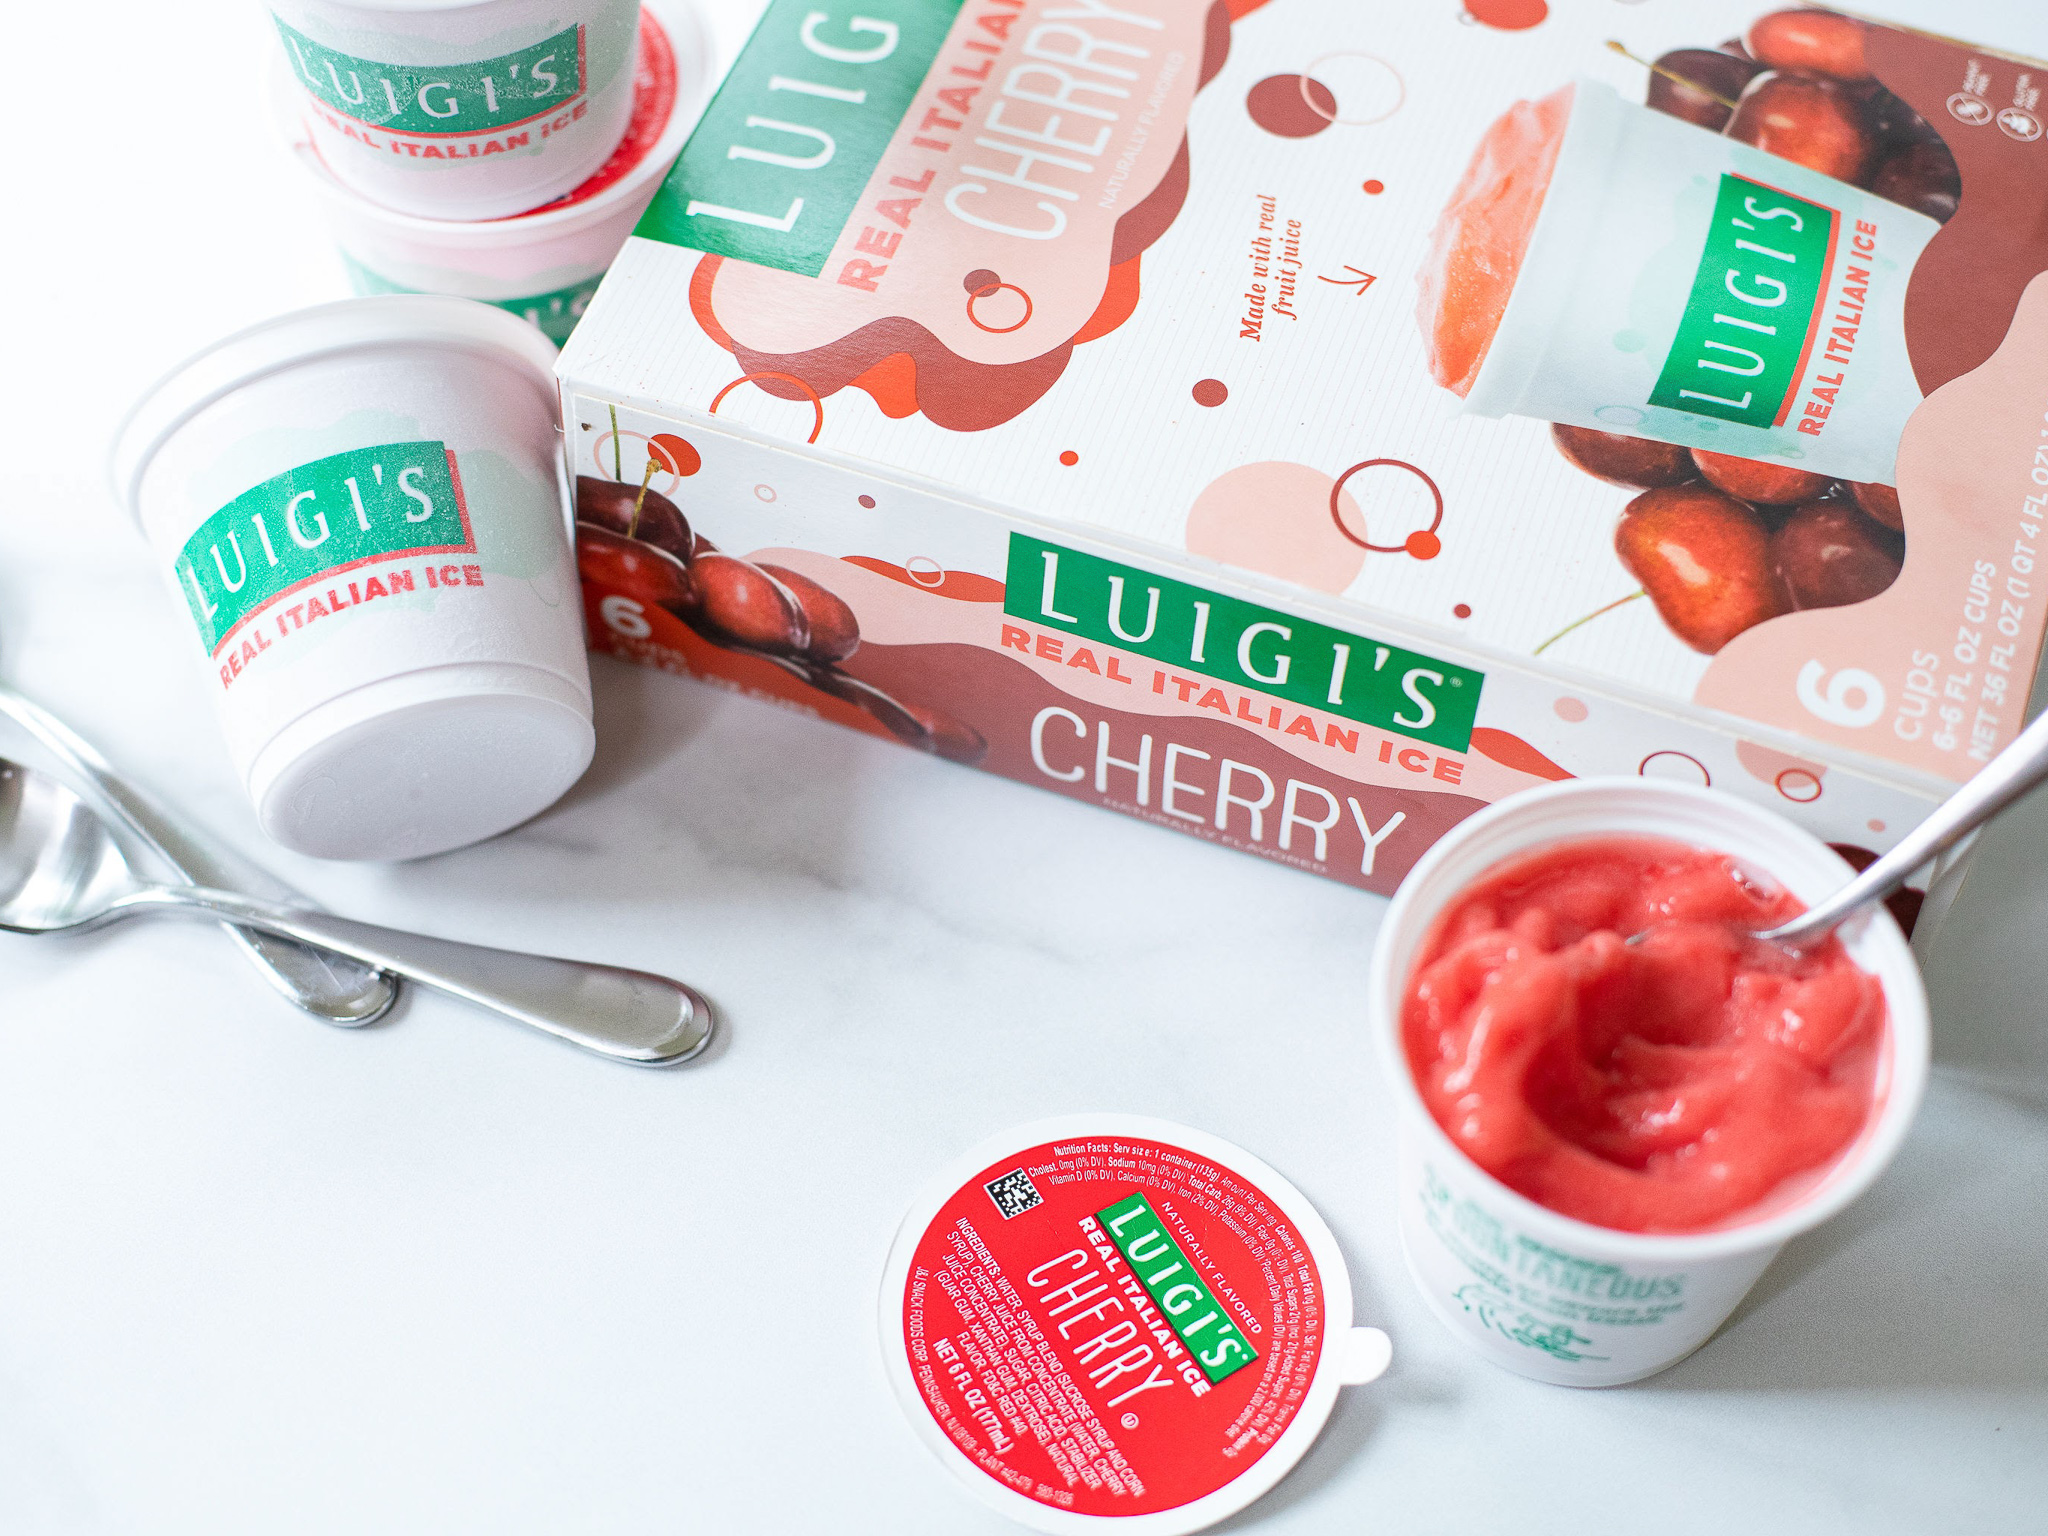 Luigi’s Real Italian Ice Only 40¢ At Publix (7¢ Per Serving)